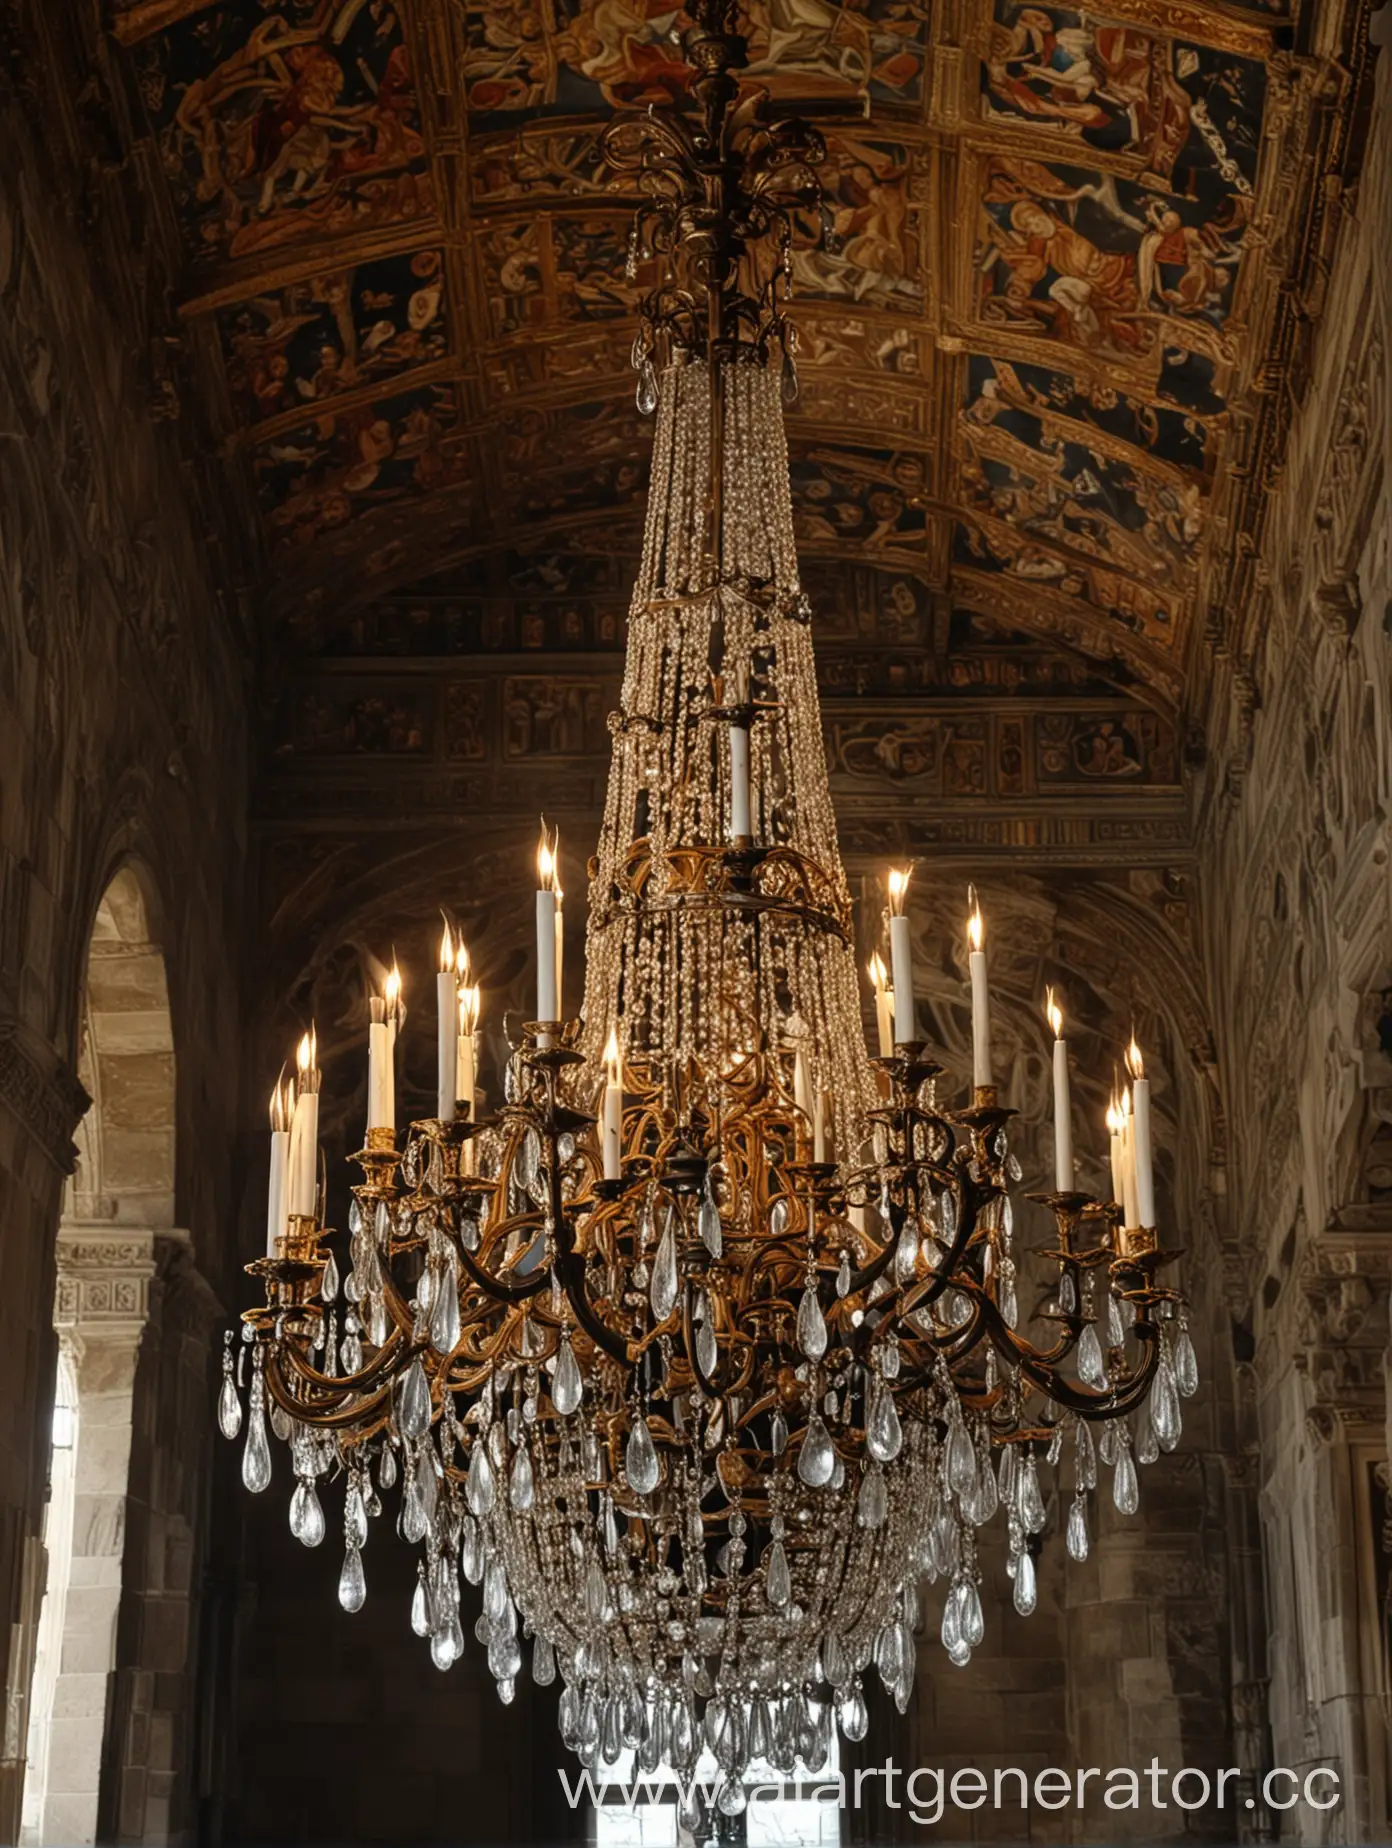 Exquisite-Chandeliers-Illuminating-Palatial-Grandeur-in-the-Middle-Ages